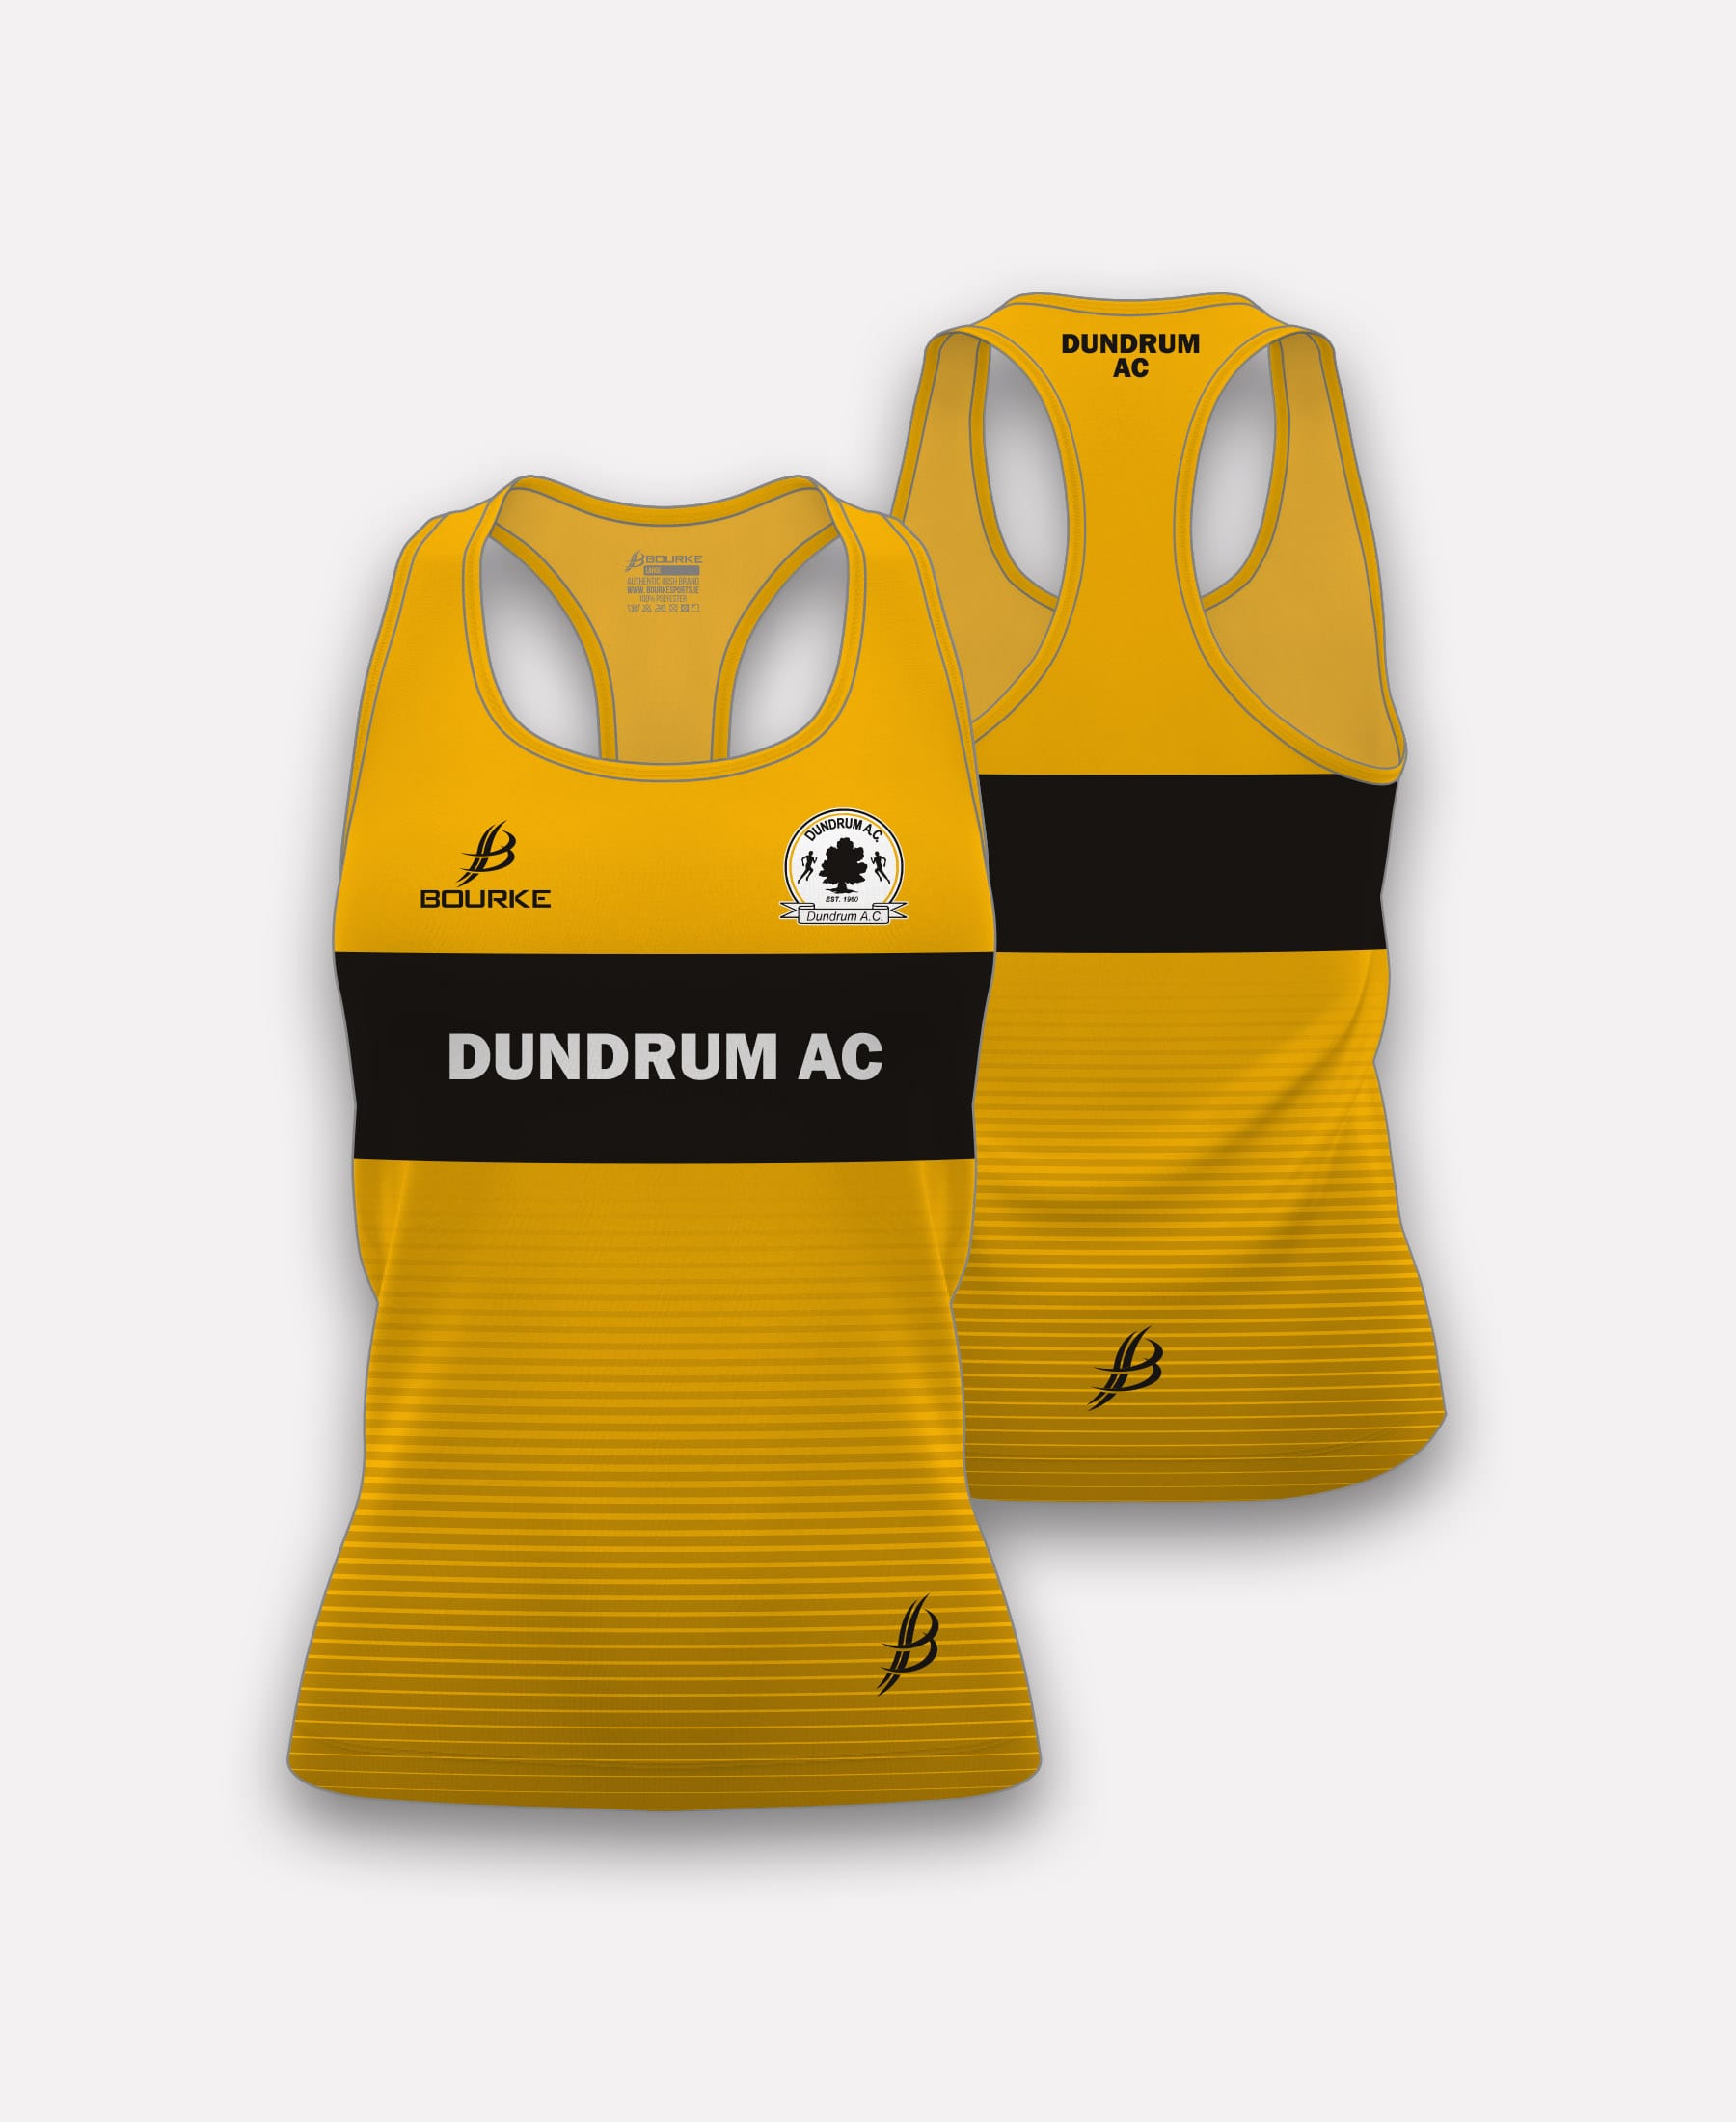 Dundrum AC Lady's Singlet